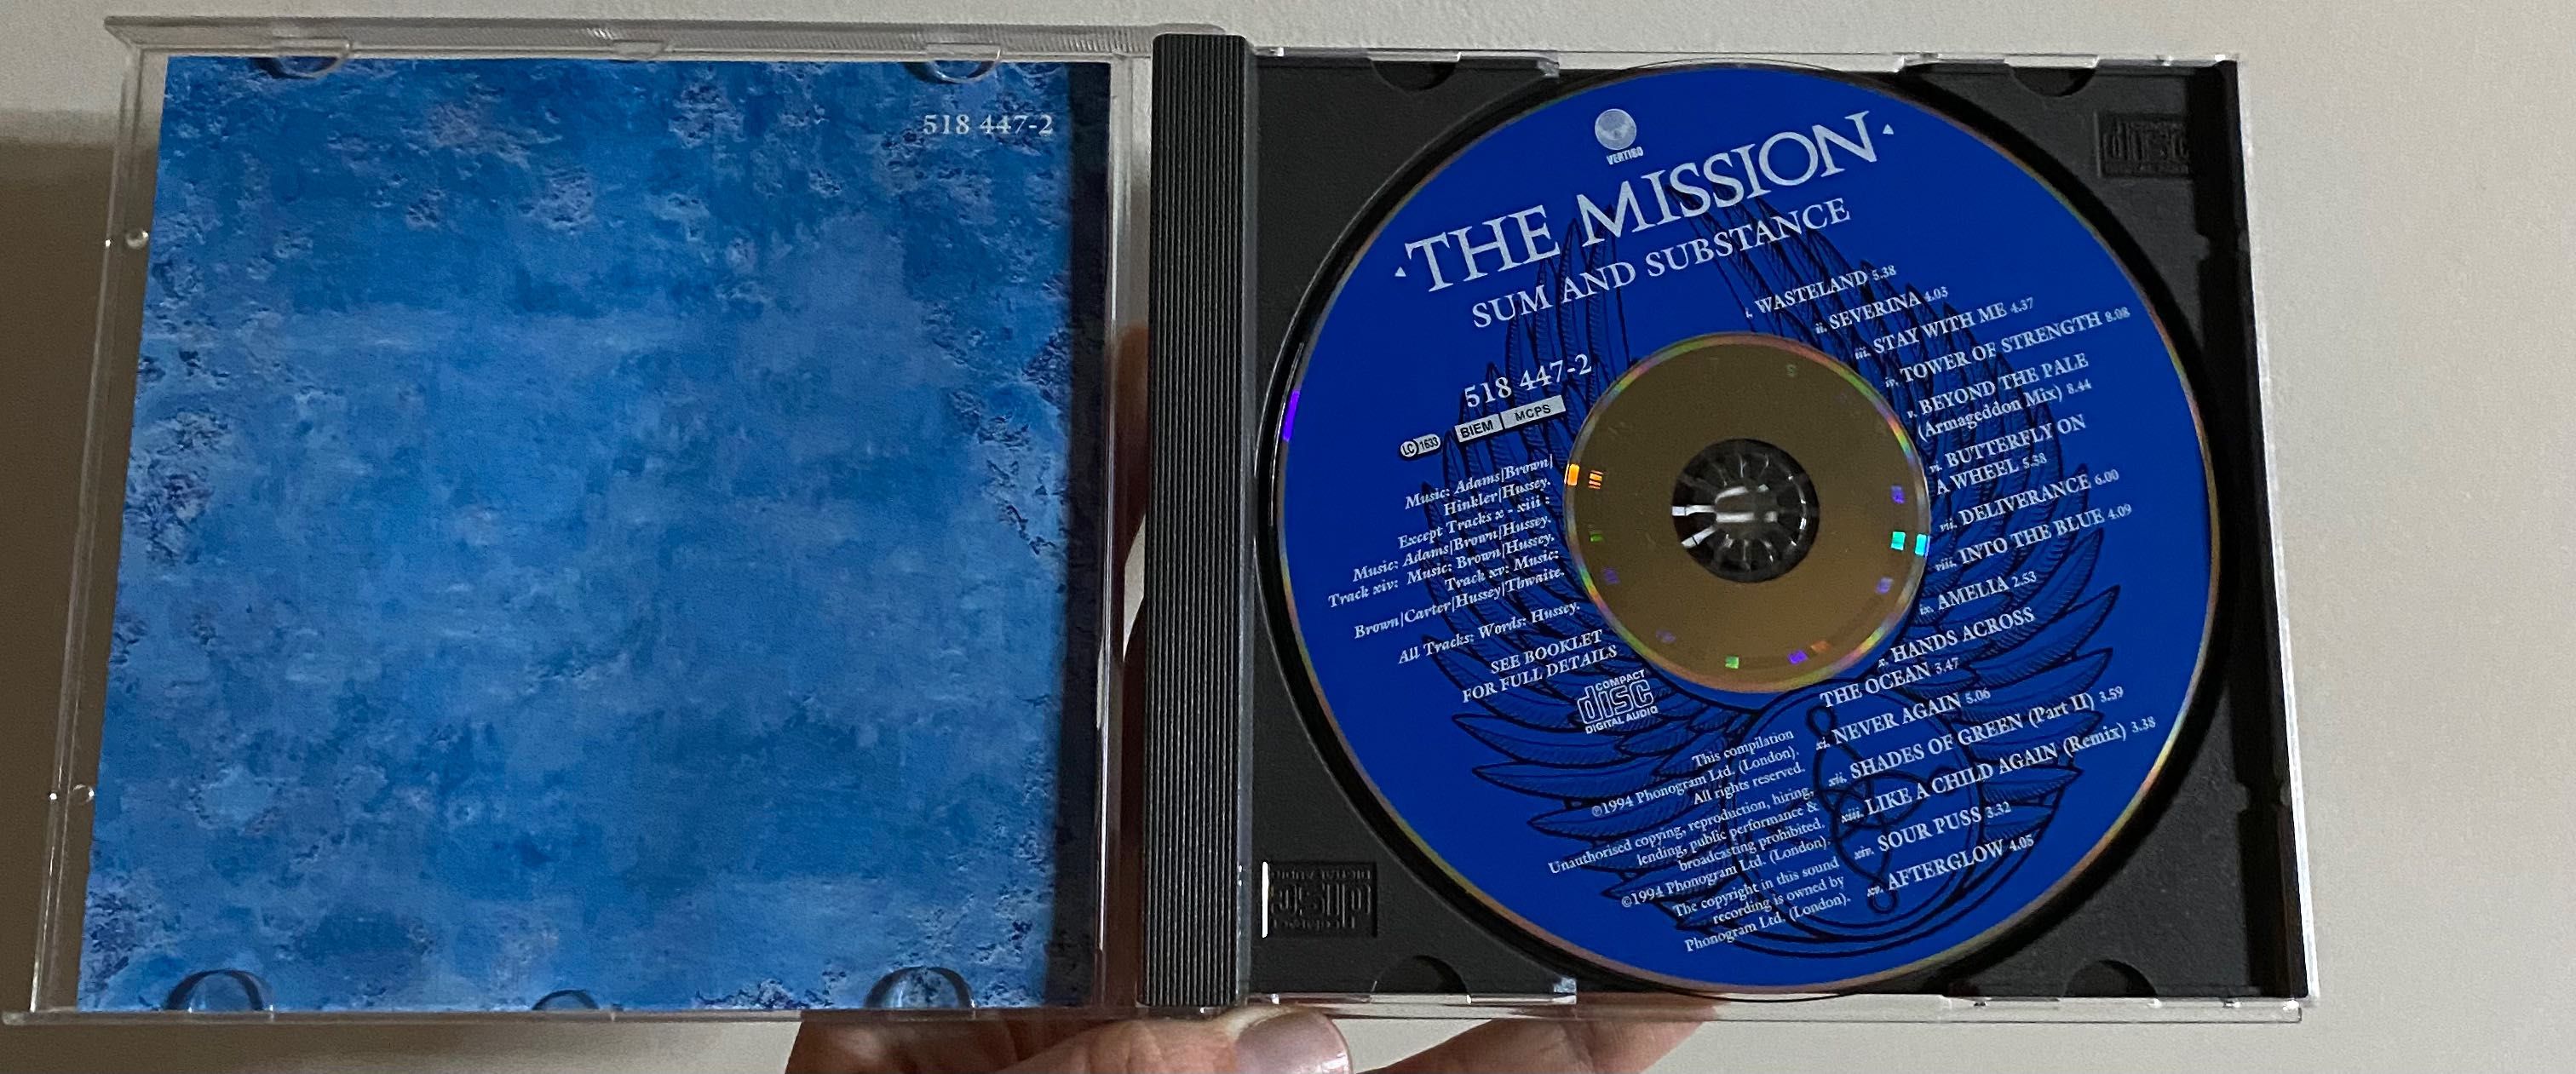 CD The Mission “Sum and Substance”